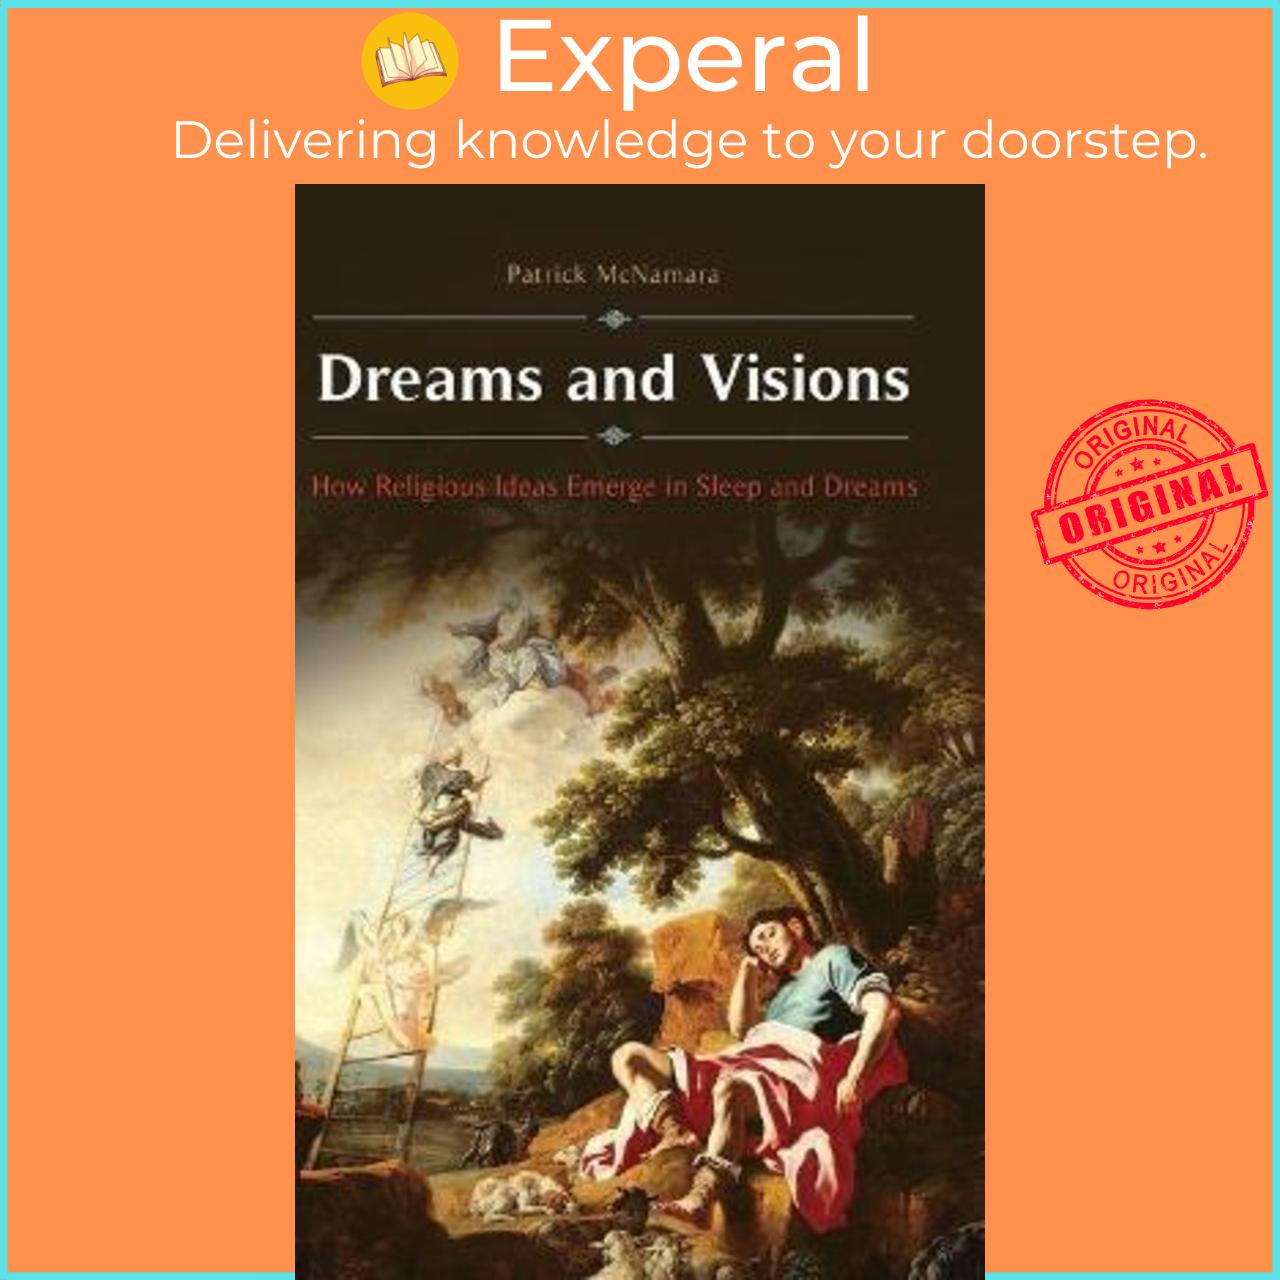 Hình ảnh Sách - Dreams and Visions : How Religious Ideas Emerge in Sleep and Dreams by Patrick Mcnamara (US edition, hardcover)